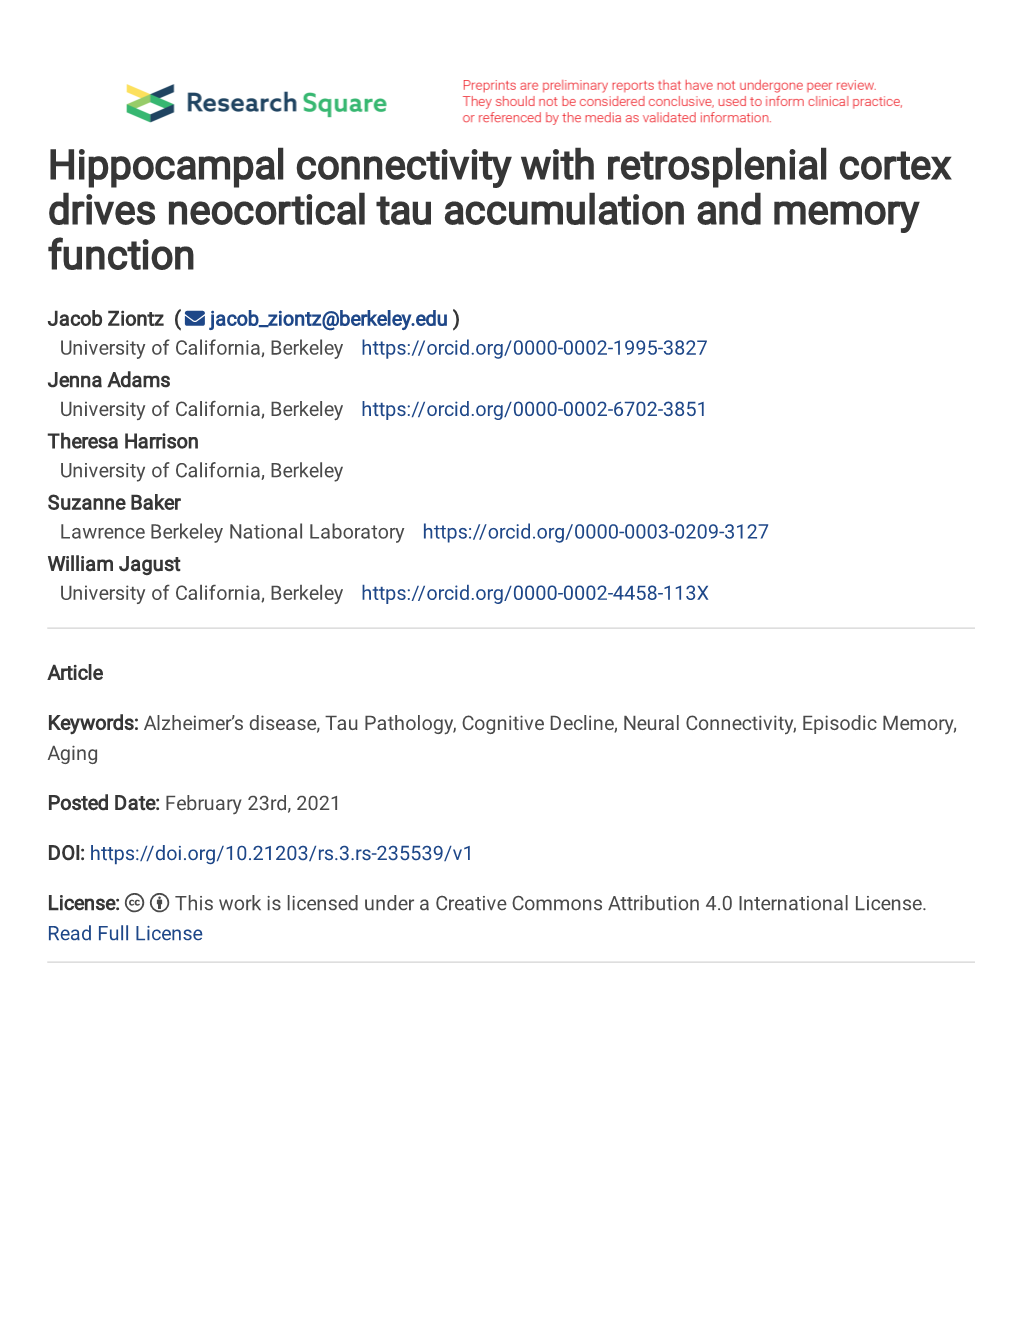 Hippocampal Connectivity with Retrosplenial Cortex Drives Neocortical Tau Accumulation and Memory Function